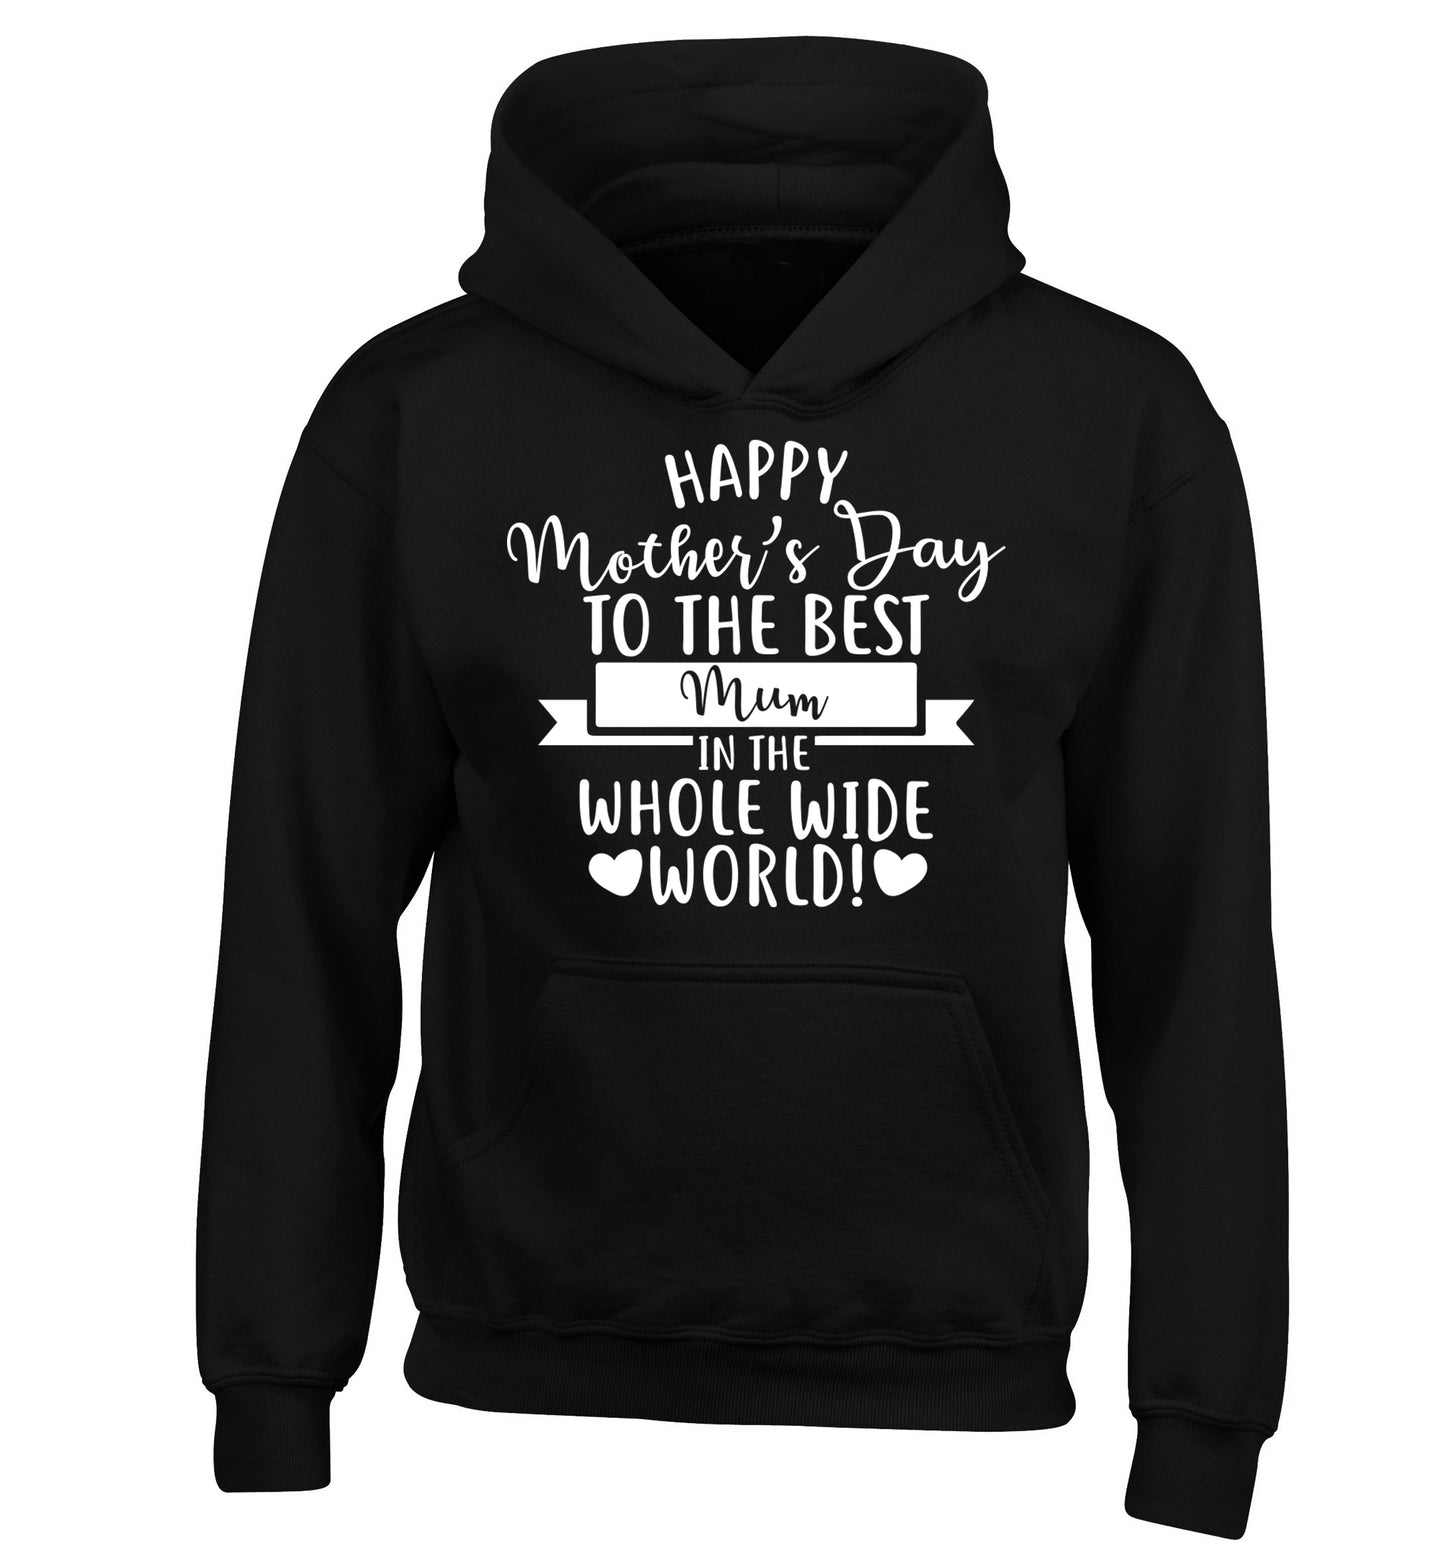 Happy Mother's Day to the best mum in the whole wide world! children's black hoodie 12-13 Years